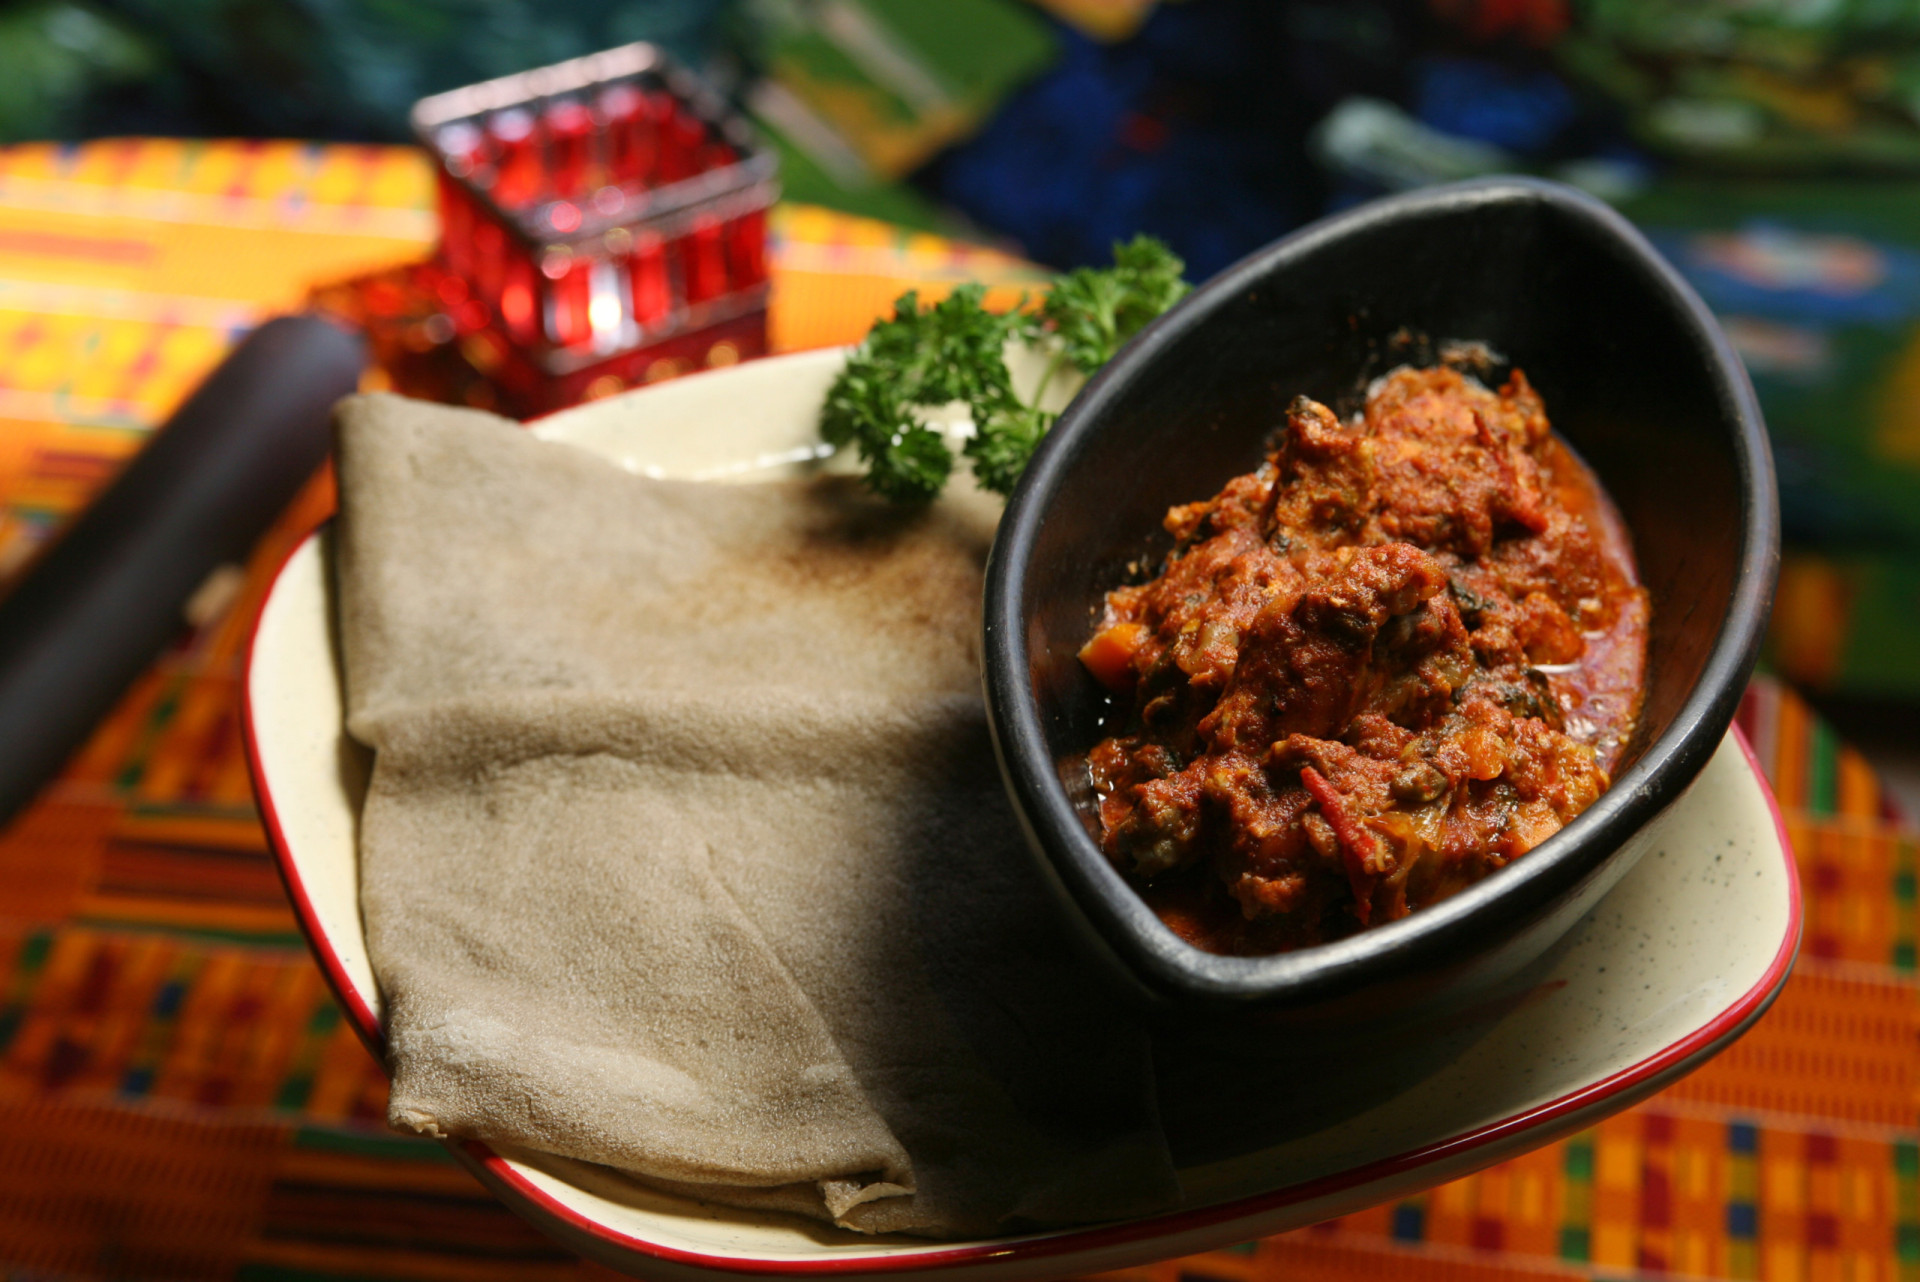 <p>A chicken and egg slow-cooked stew from Ethiopia with a fragrant base of berbere, serve Dora Wat with injera for a hearty dinner.</p><p><a href="https://www.msn.com/en-us/community/channel/vid-7xx8mnucu55yw63we9va2gwr7uihbxwc68fxqp25x6tg4ftibpra?cvid=94631541bc0f4f89bfd59158d696ad7e">Follow us and access great exclusive content every day</a></p>